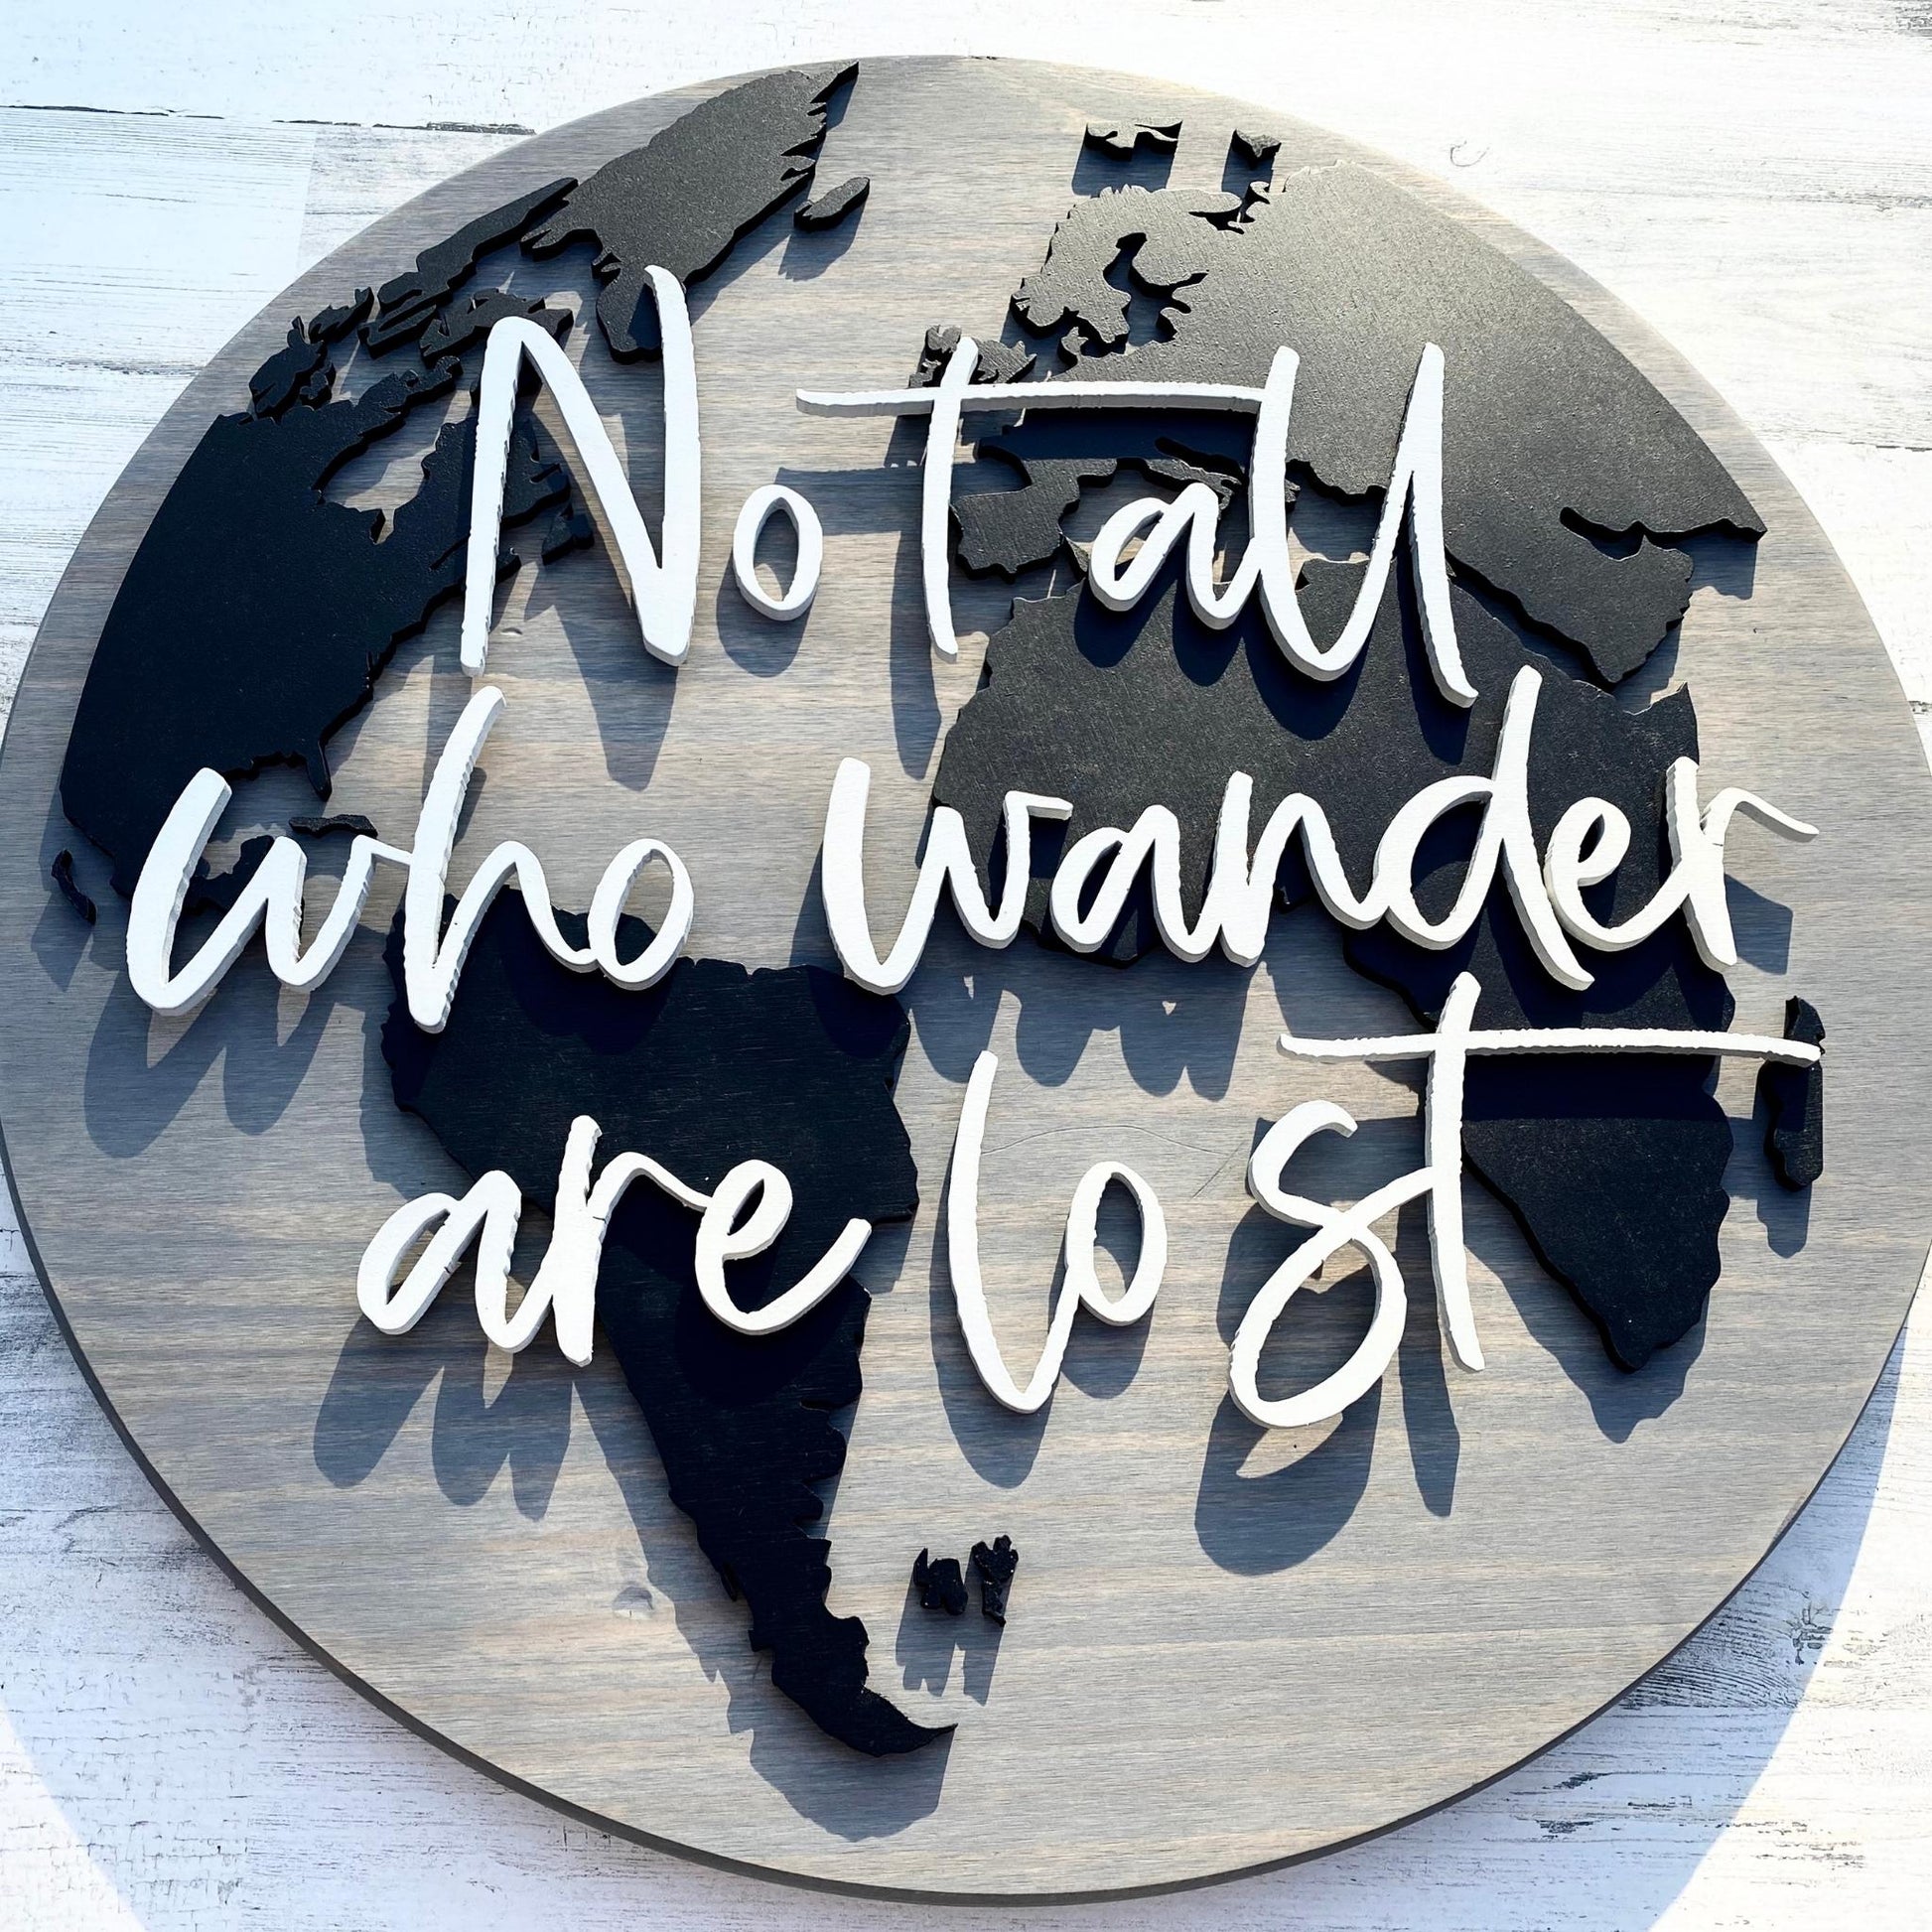 Not All Who Wander Are Lost World Map - B-Cozy Home Decor